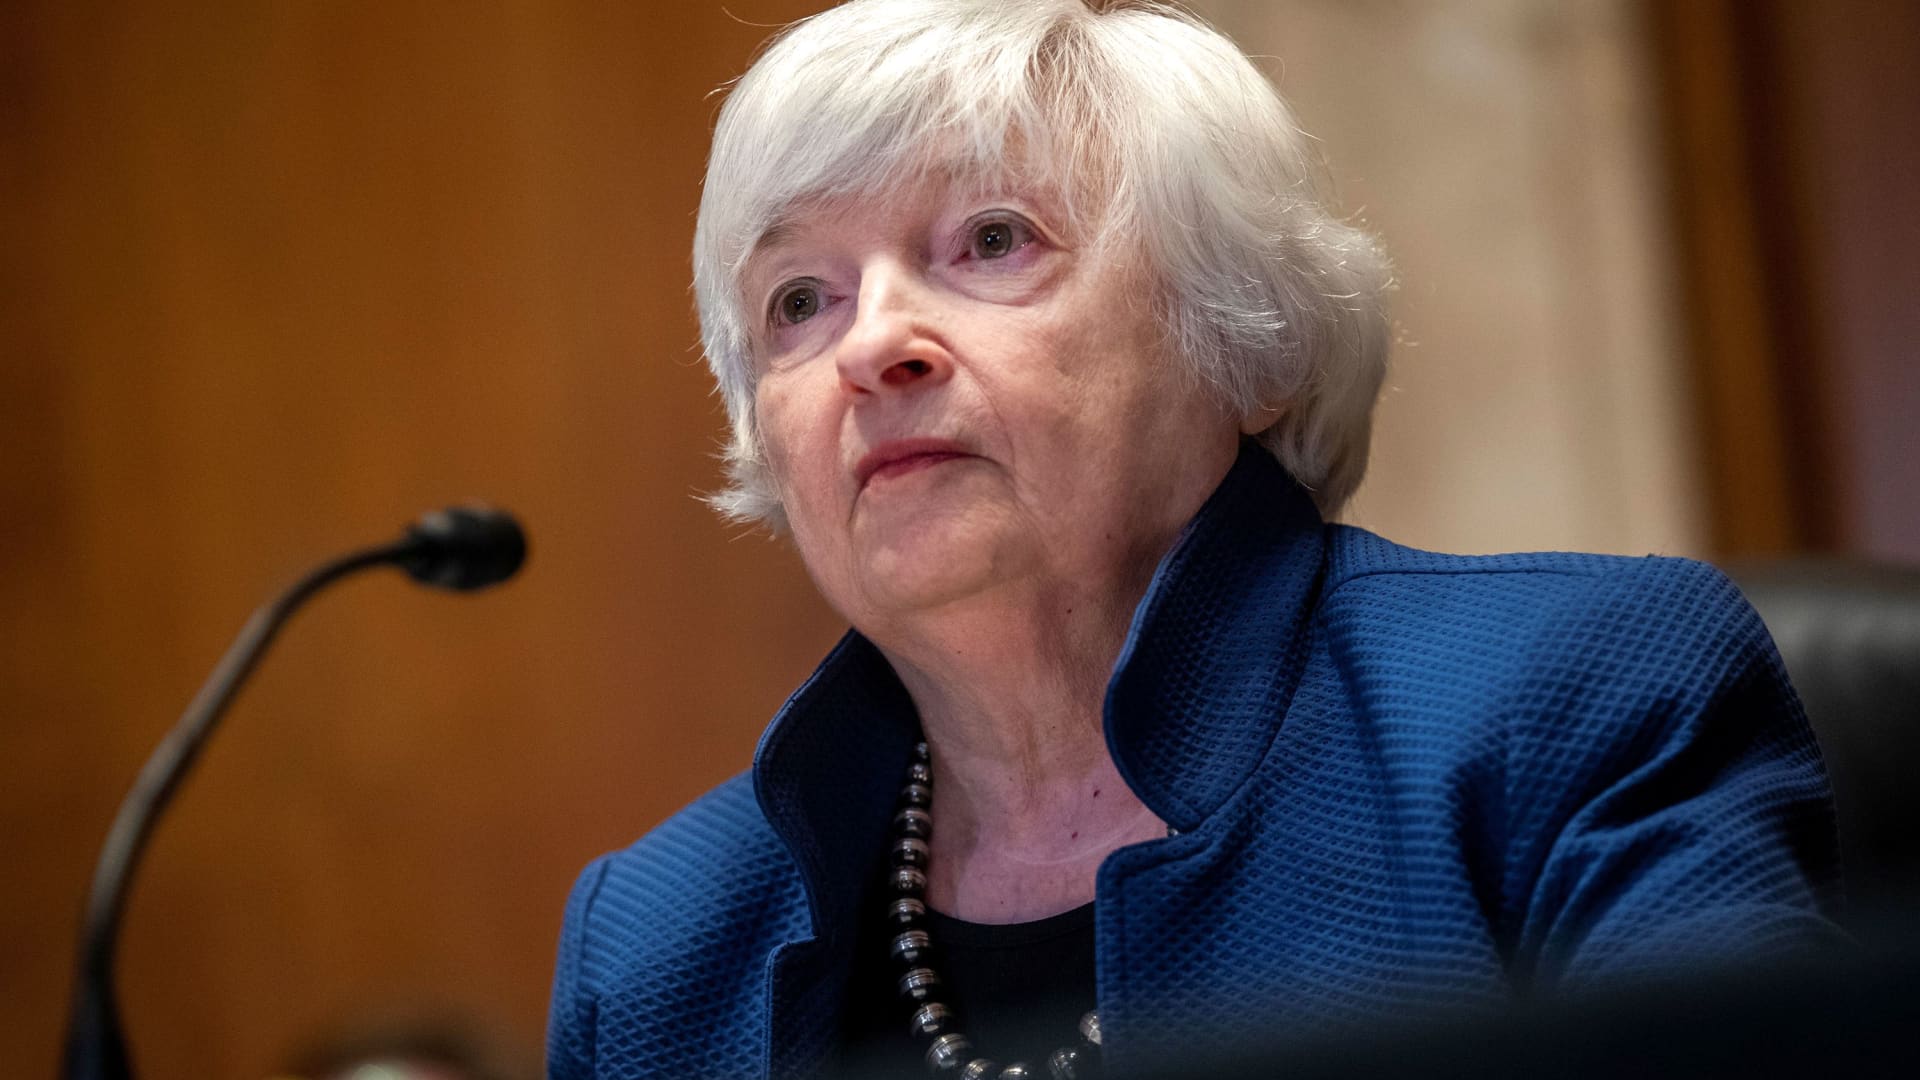 U.S. Treasury Secretary Janet Yellen testifies before the Senate Appropriations Subcommittee on Financial Services about the FY22 Treasury budget request on Capitol Hill, in Washington, DC, June 23, 2021.